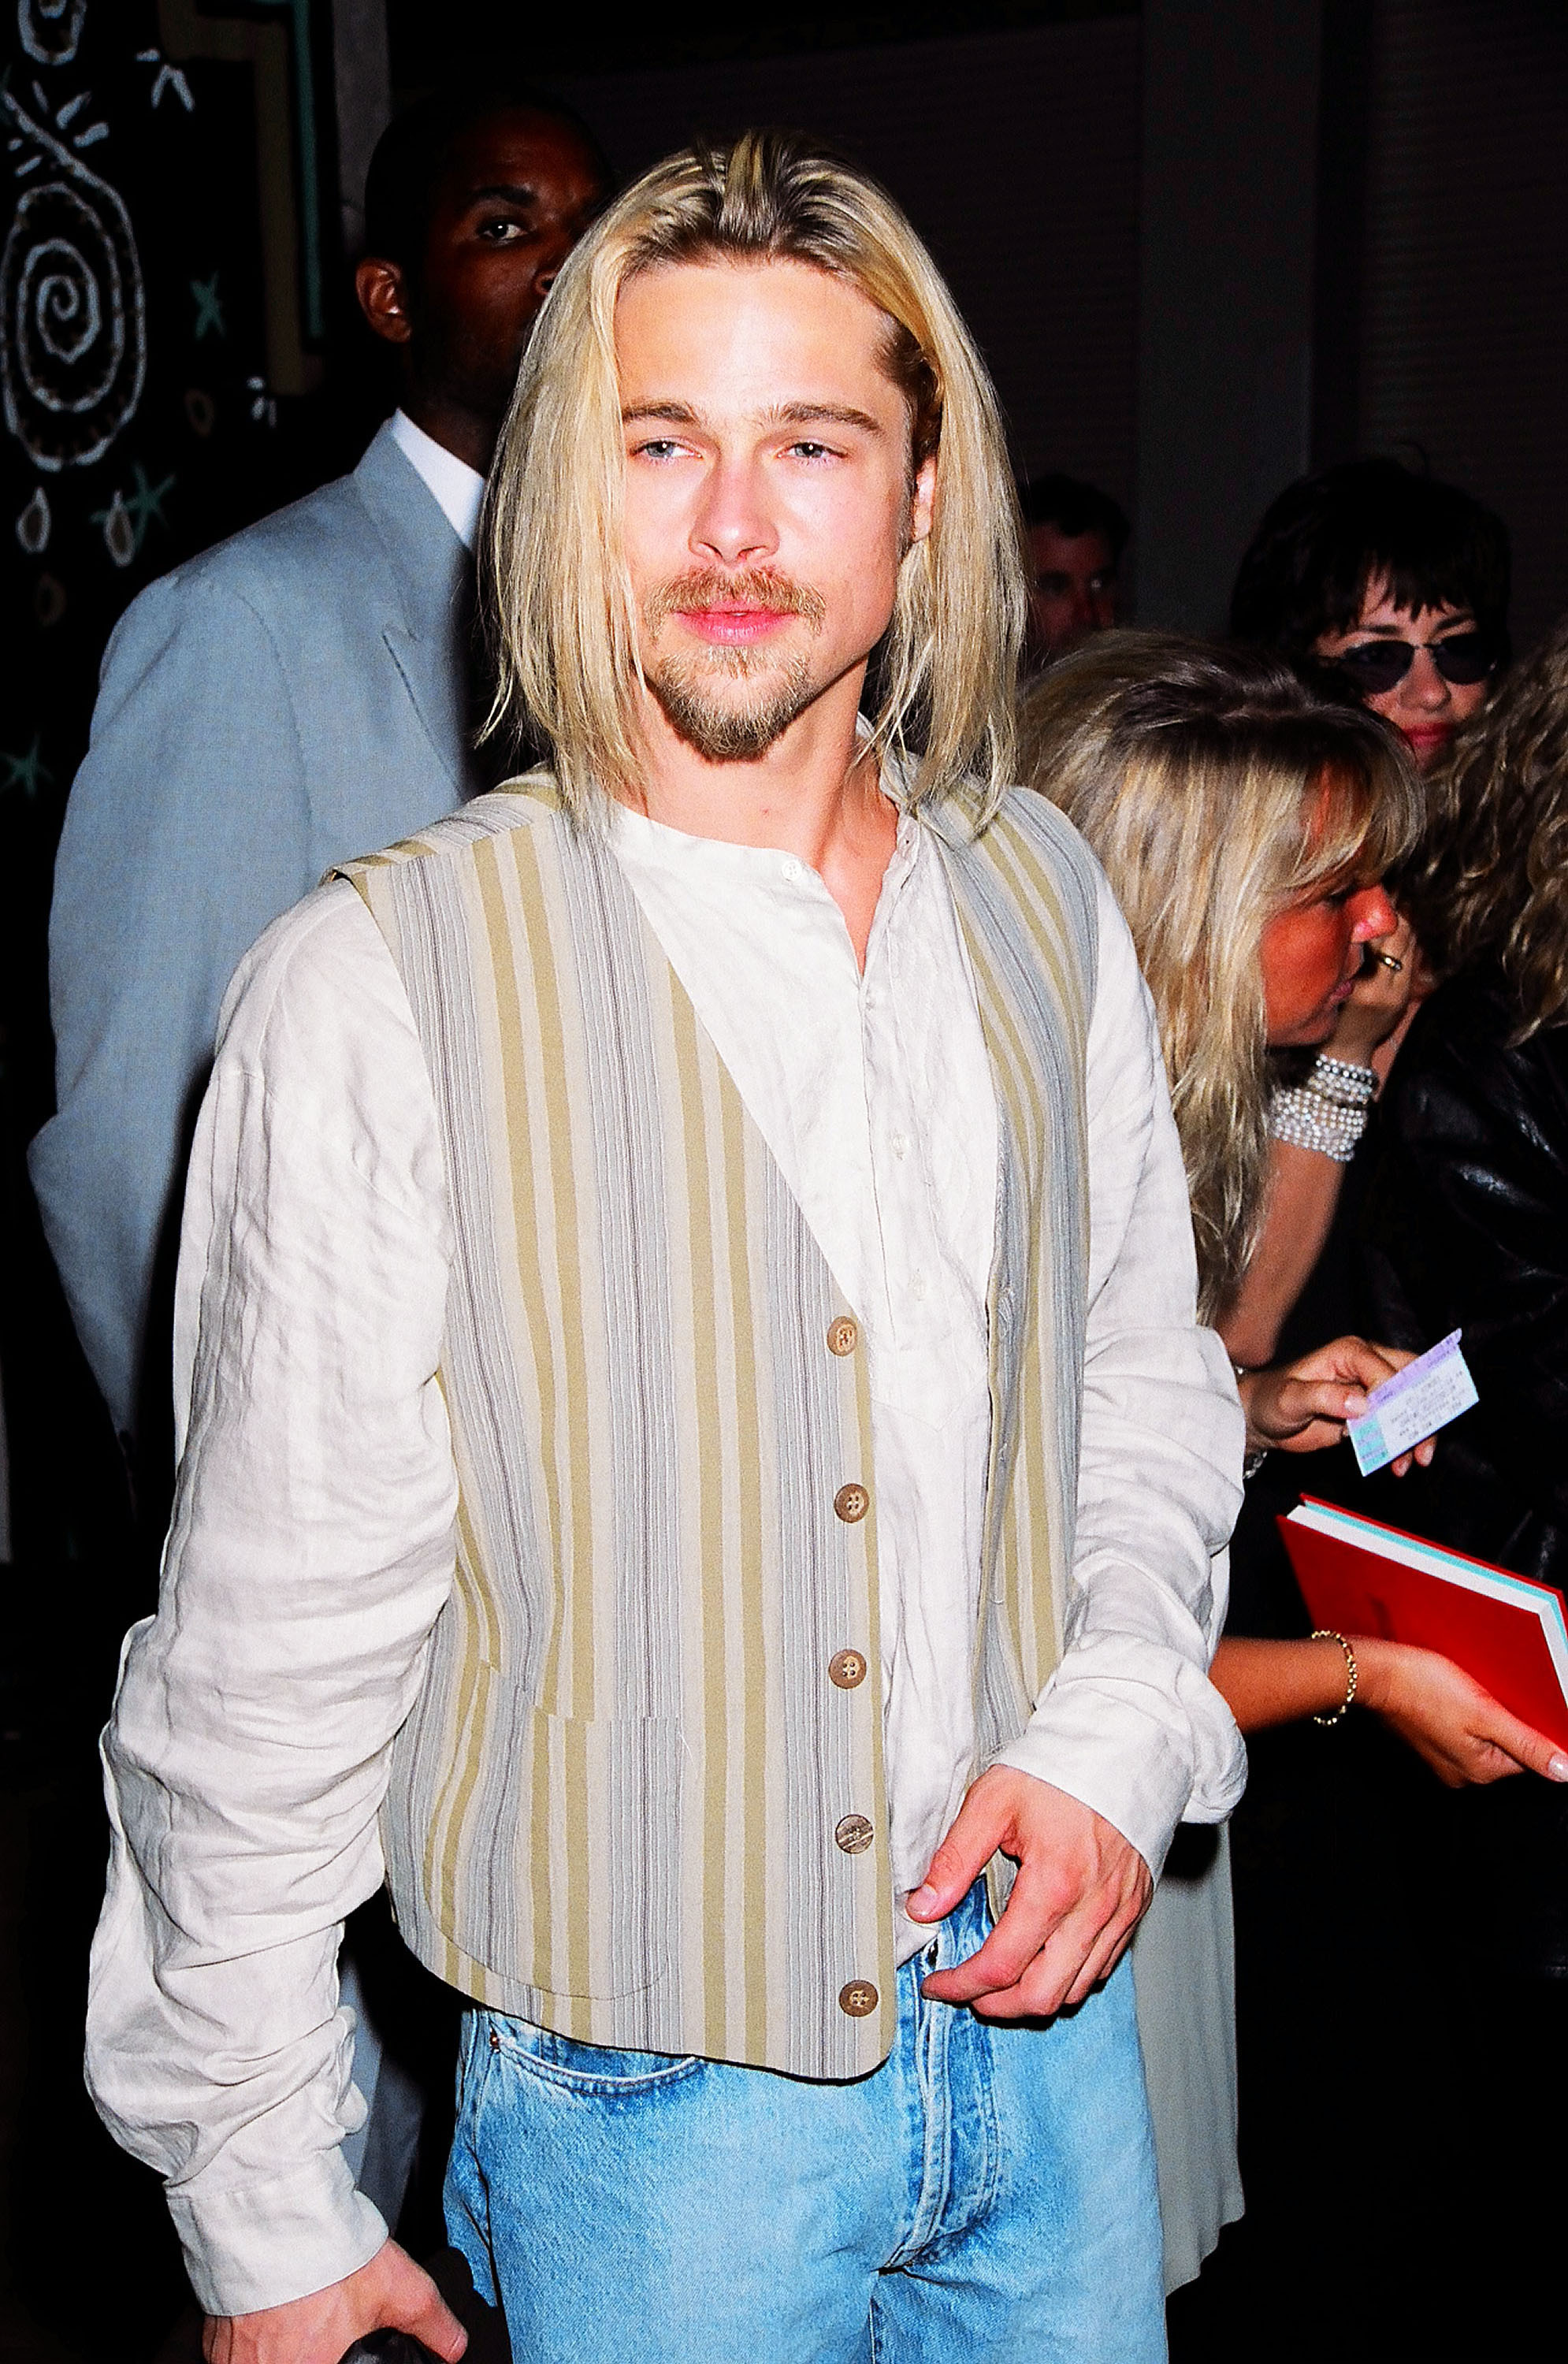 Brad Pitt during the VH1 Honors in Los Angeles, California, on October 7, 1994. | Source: Getty Images